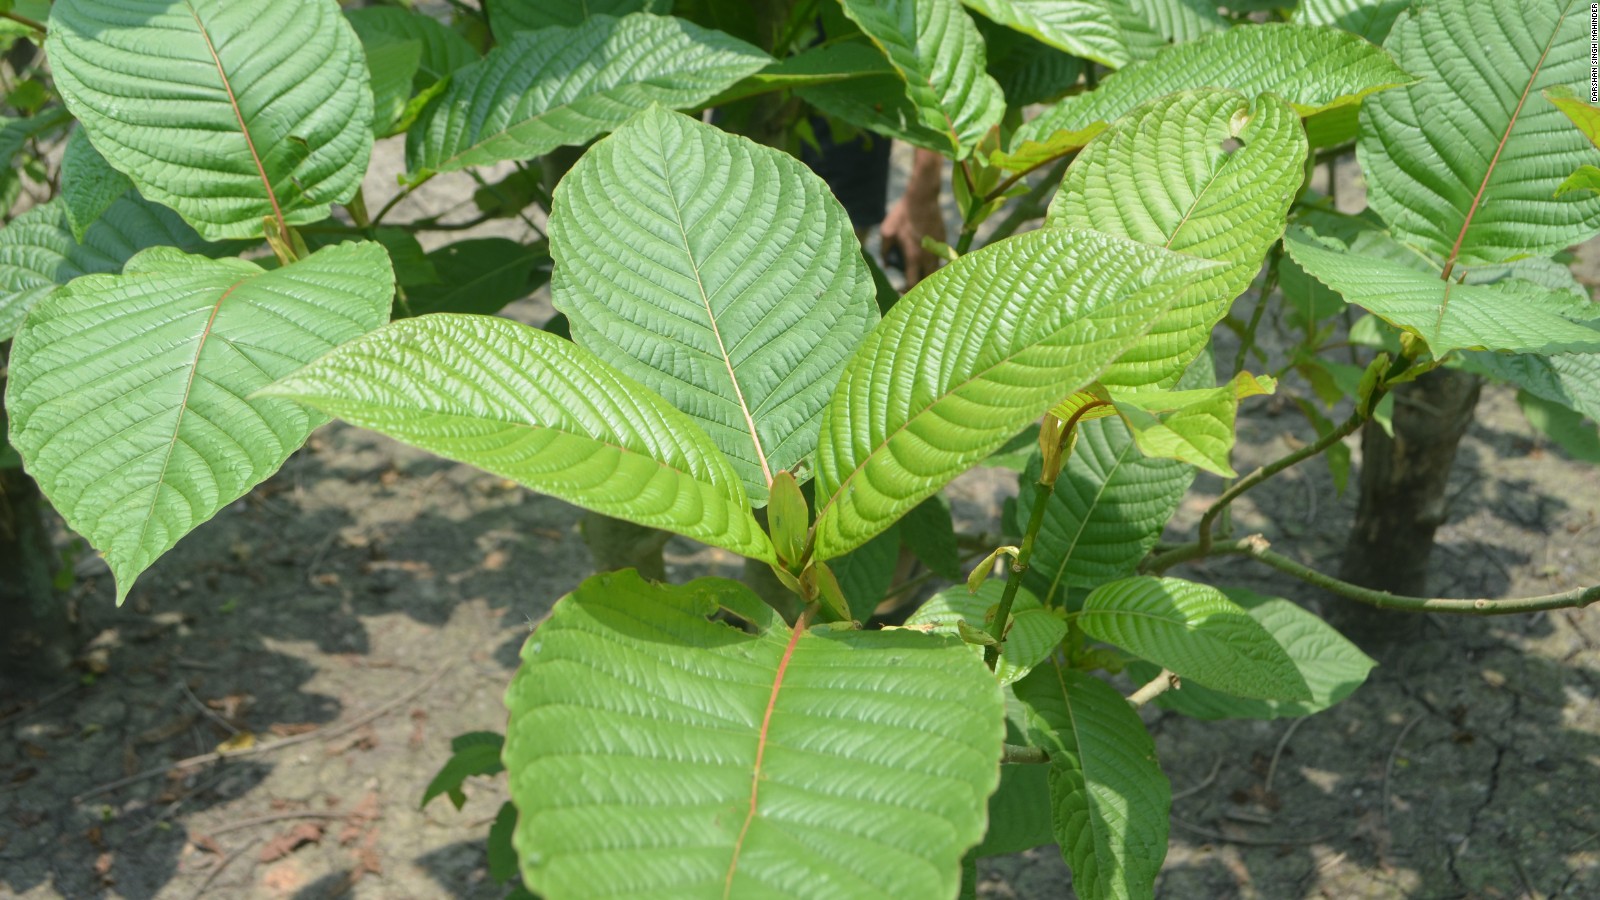 Can the kratom plant help fix the opioid crisis?